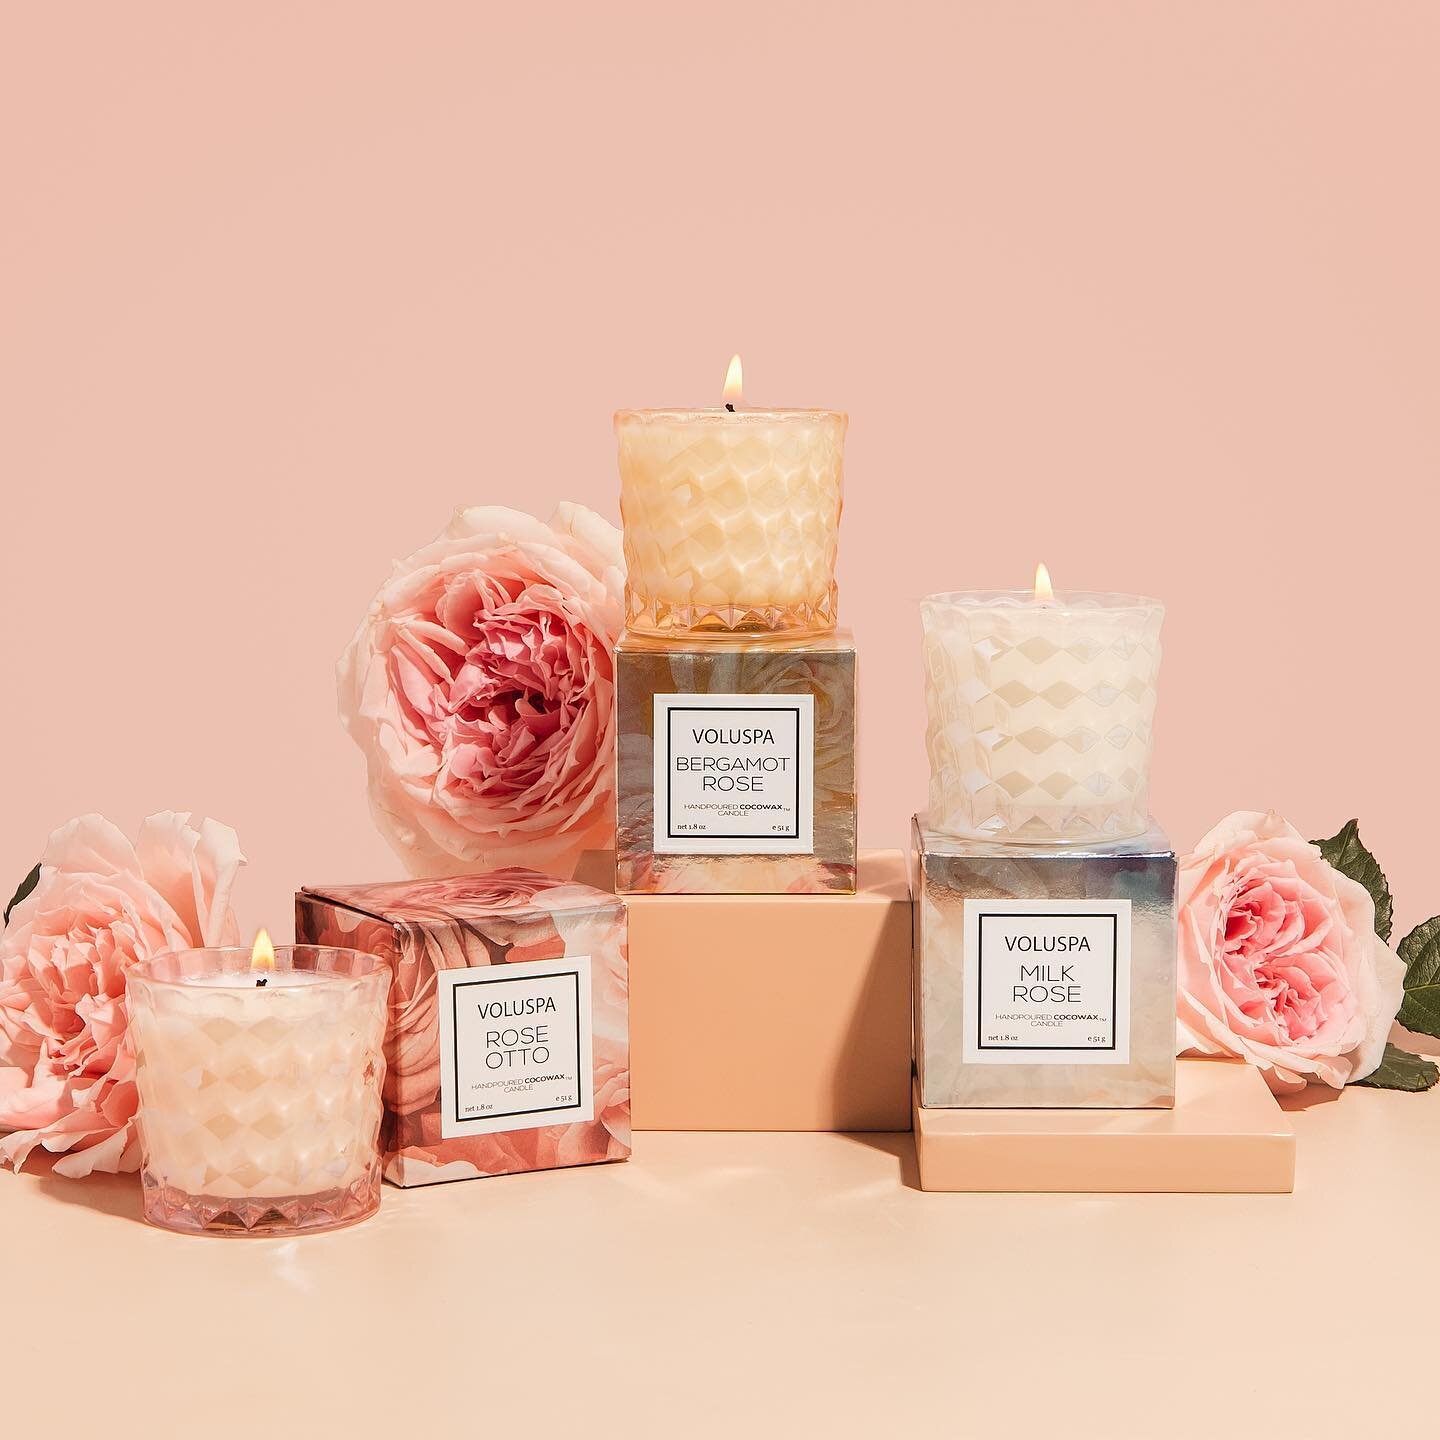 stop and smell the roses 🌹 shot for @voluspacandles 
.
.
.
#contentcreation #professionalphotography #instagramphotography #instagramcontent #brandmanagement #brandphotographer
#productphotography #thatsdarling #freelancephotography
#commericalphoto